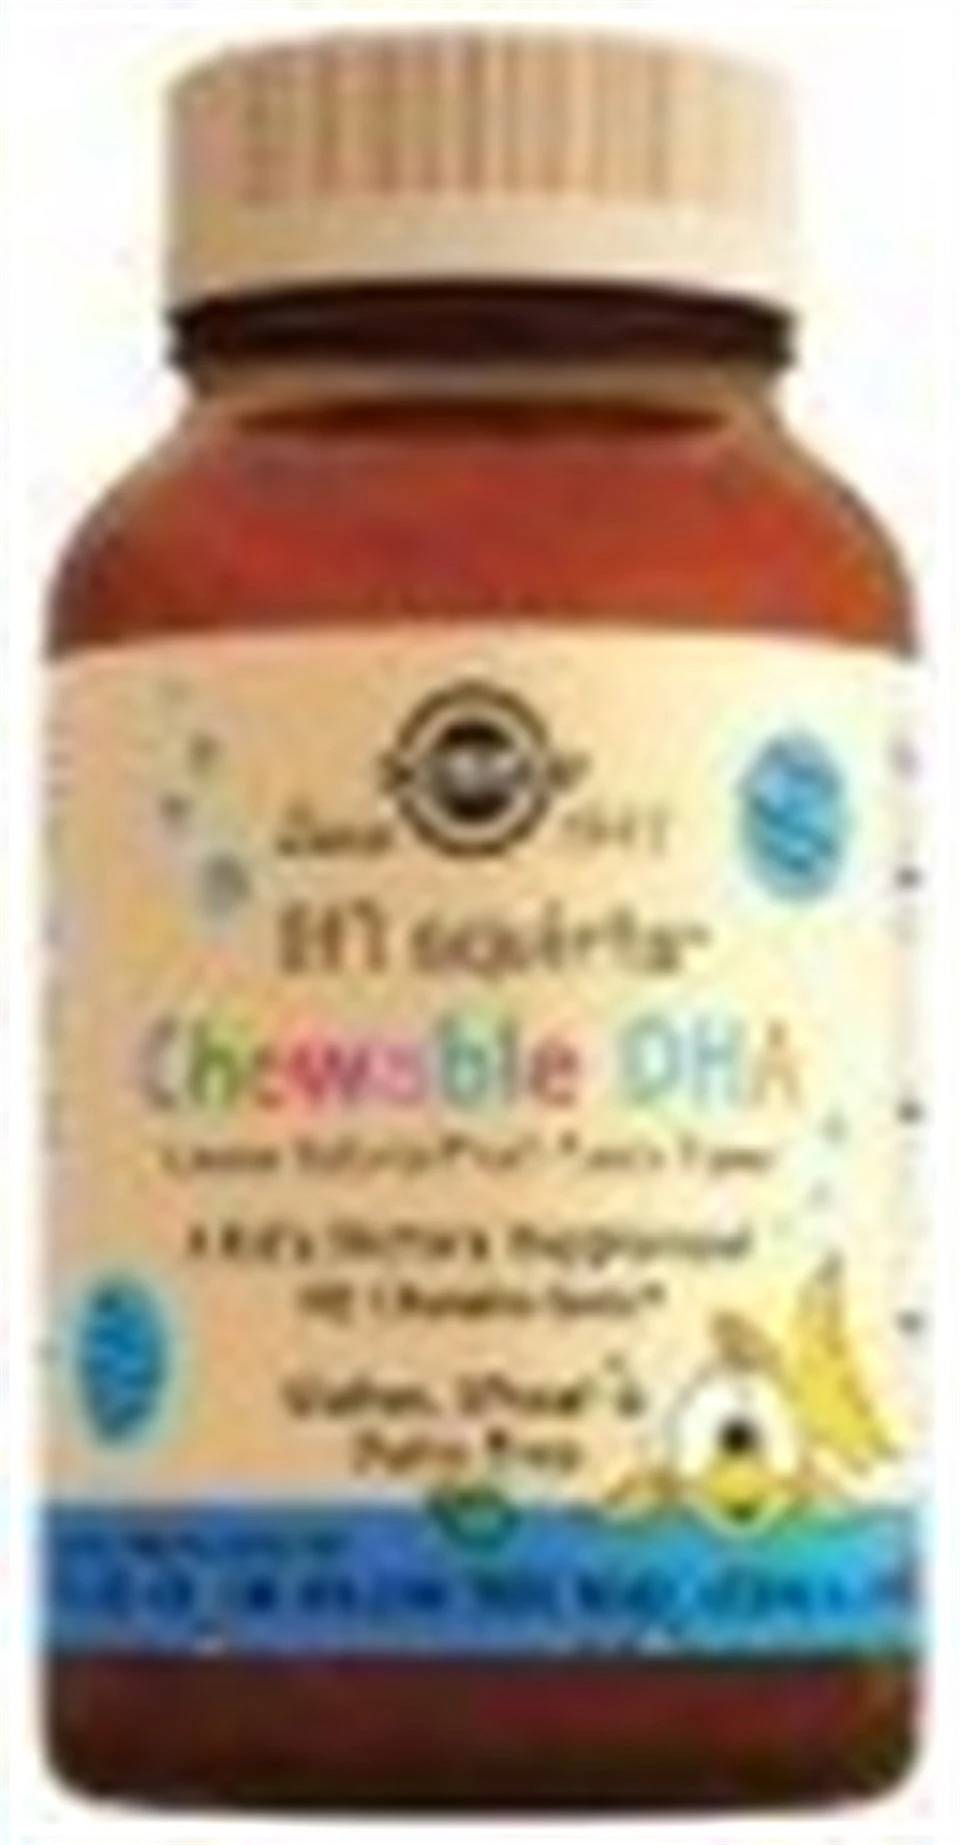 Solgar Little Squirts Chewable Dha 90 Chewable Gels